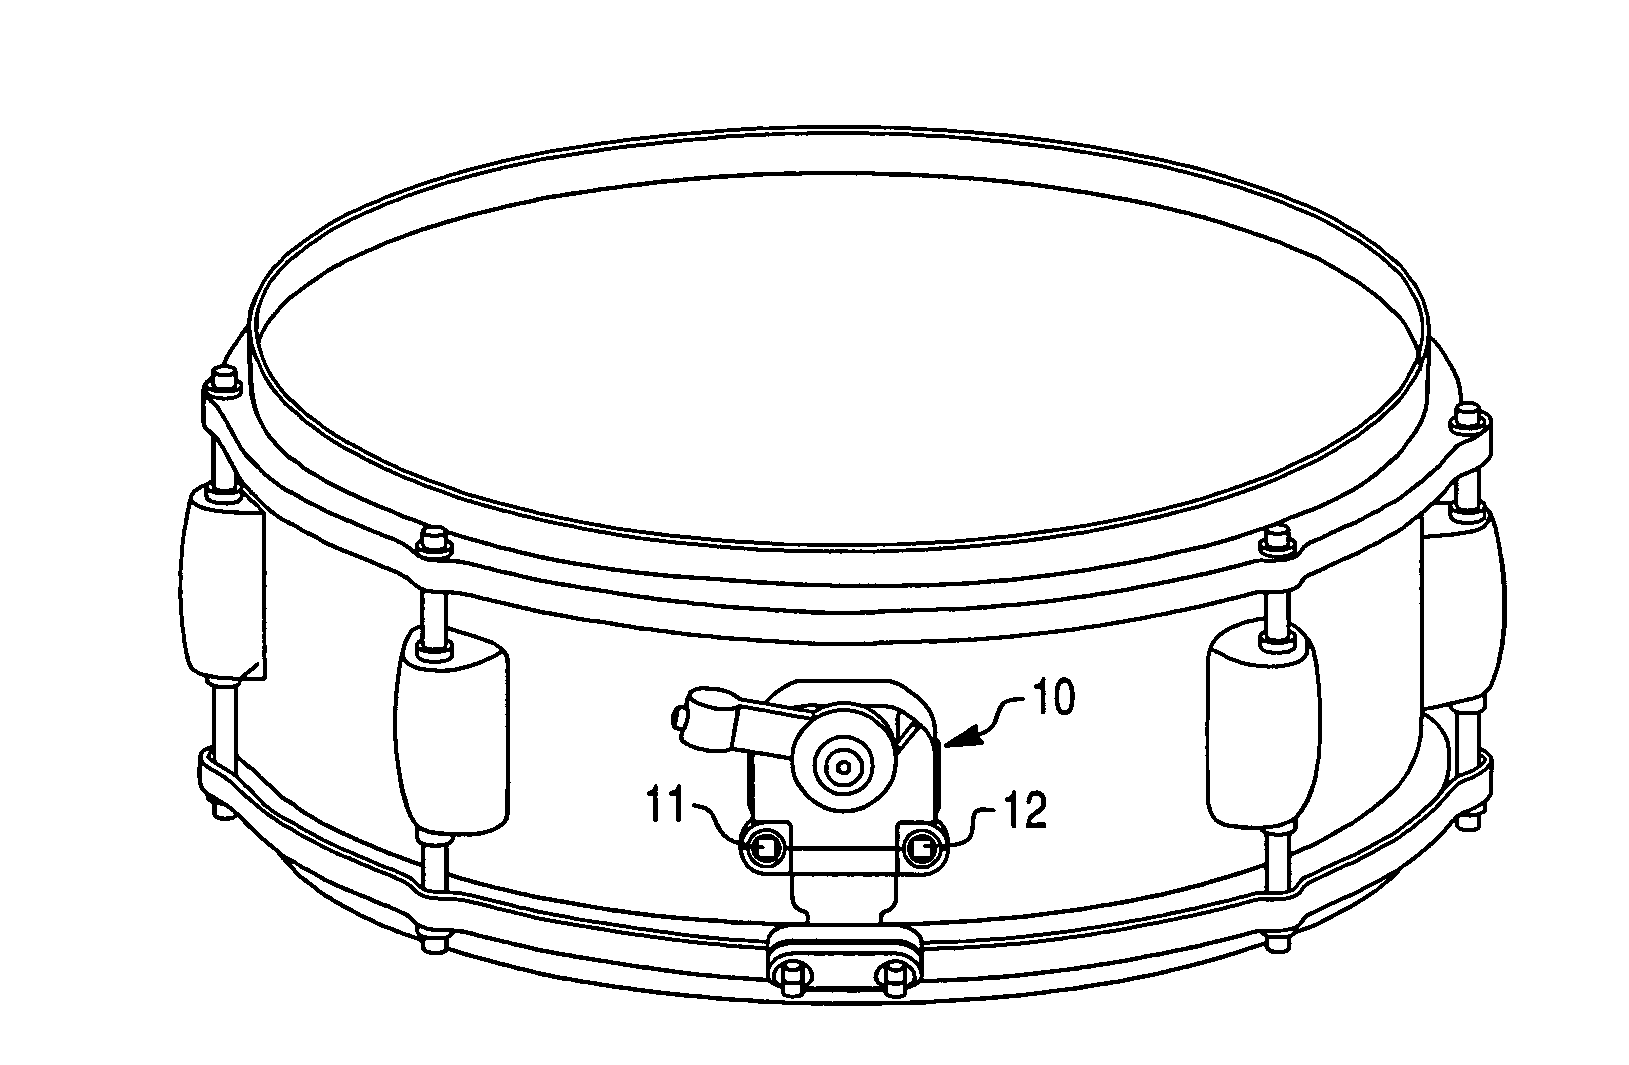 Strainer for a snare drum